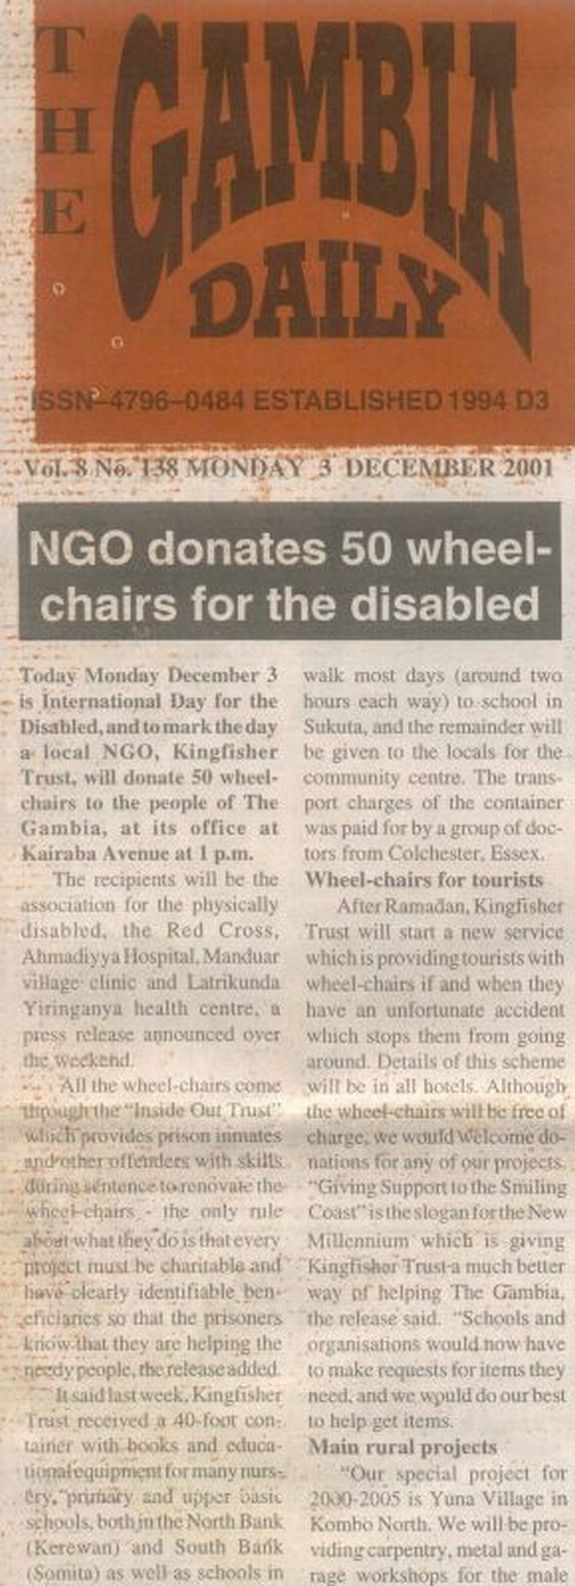 NGO donates 50 wheel chairs for the disabled